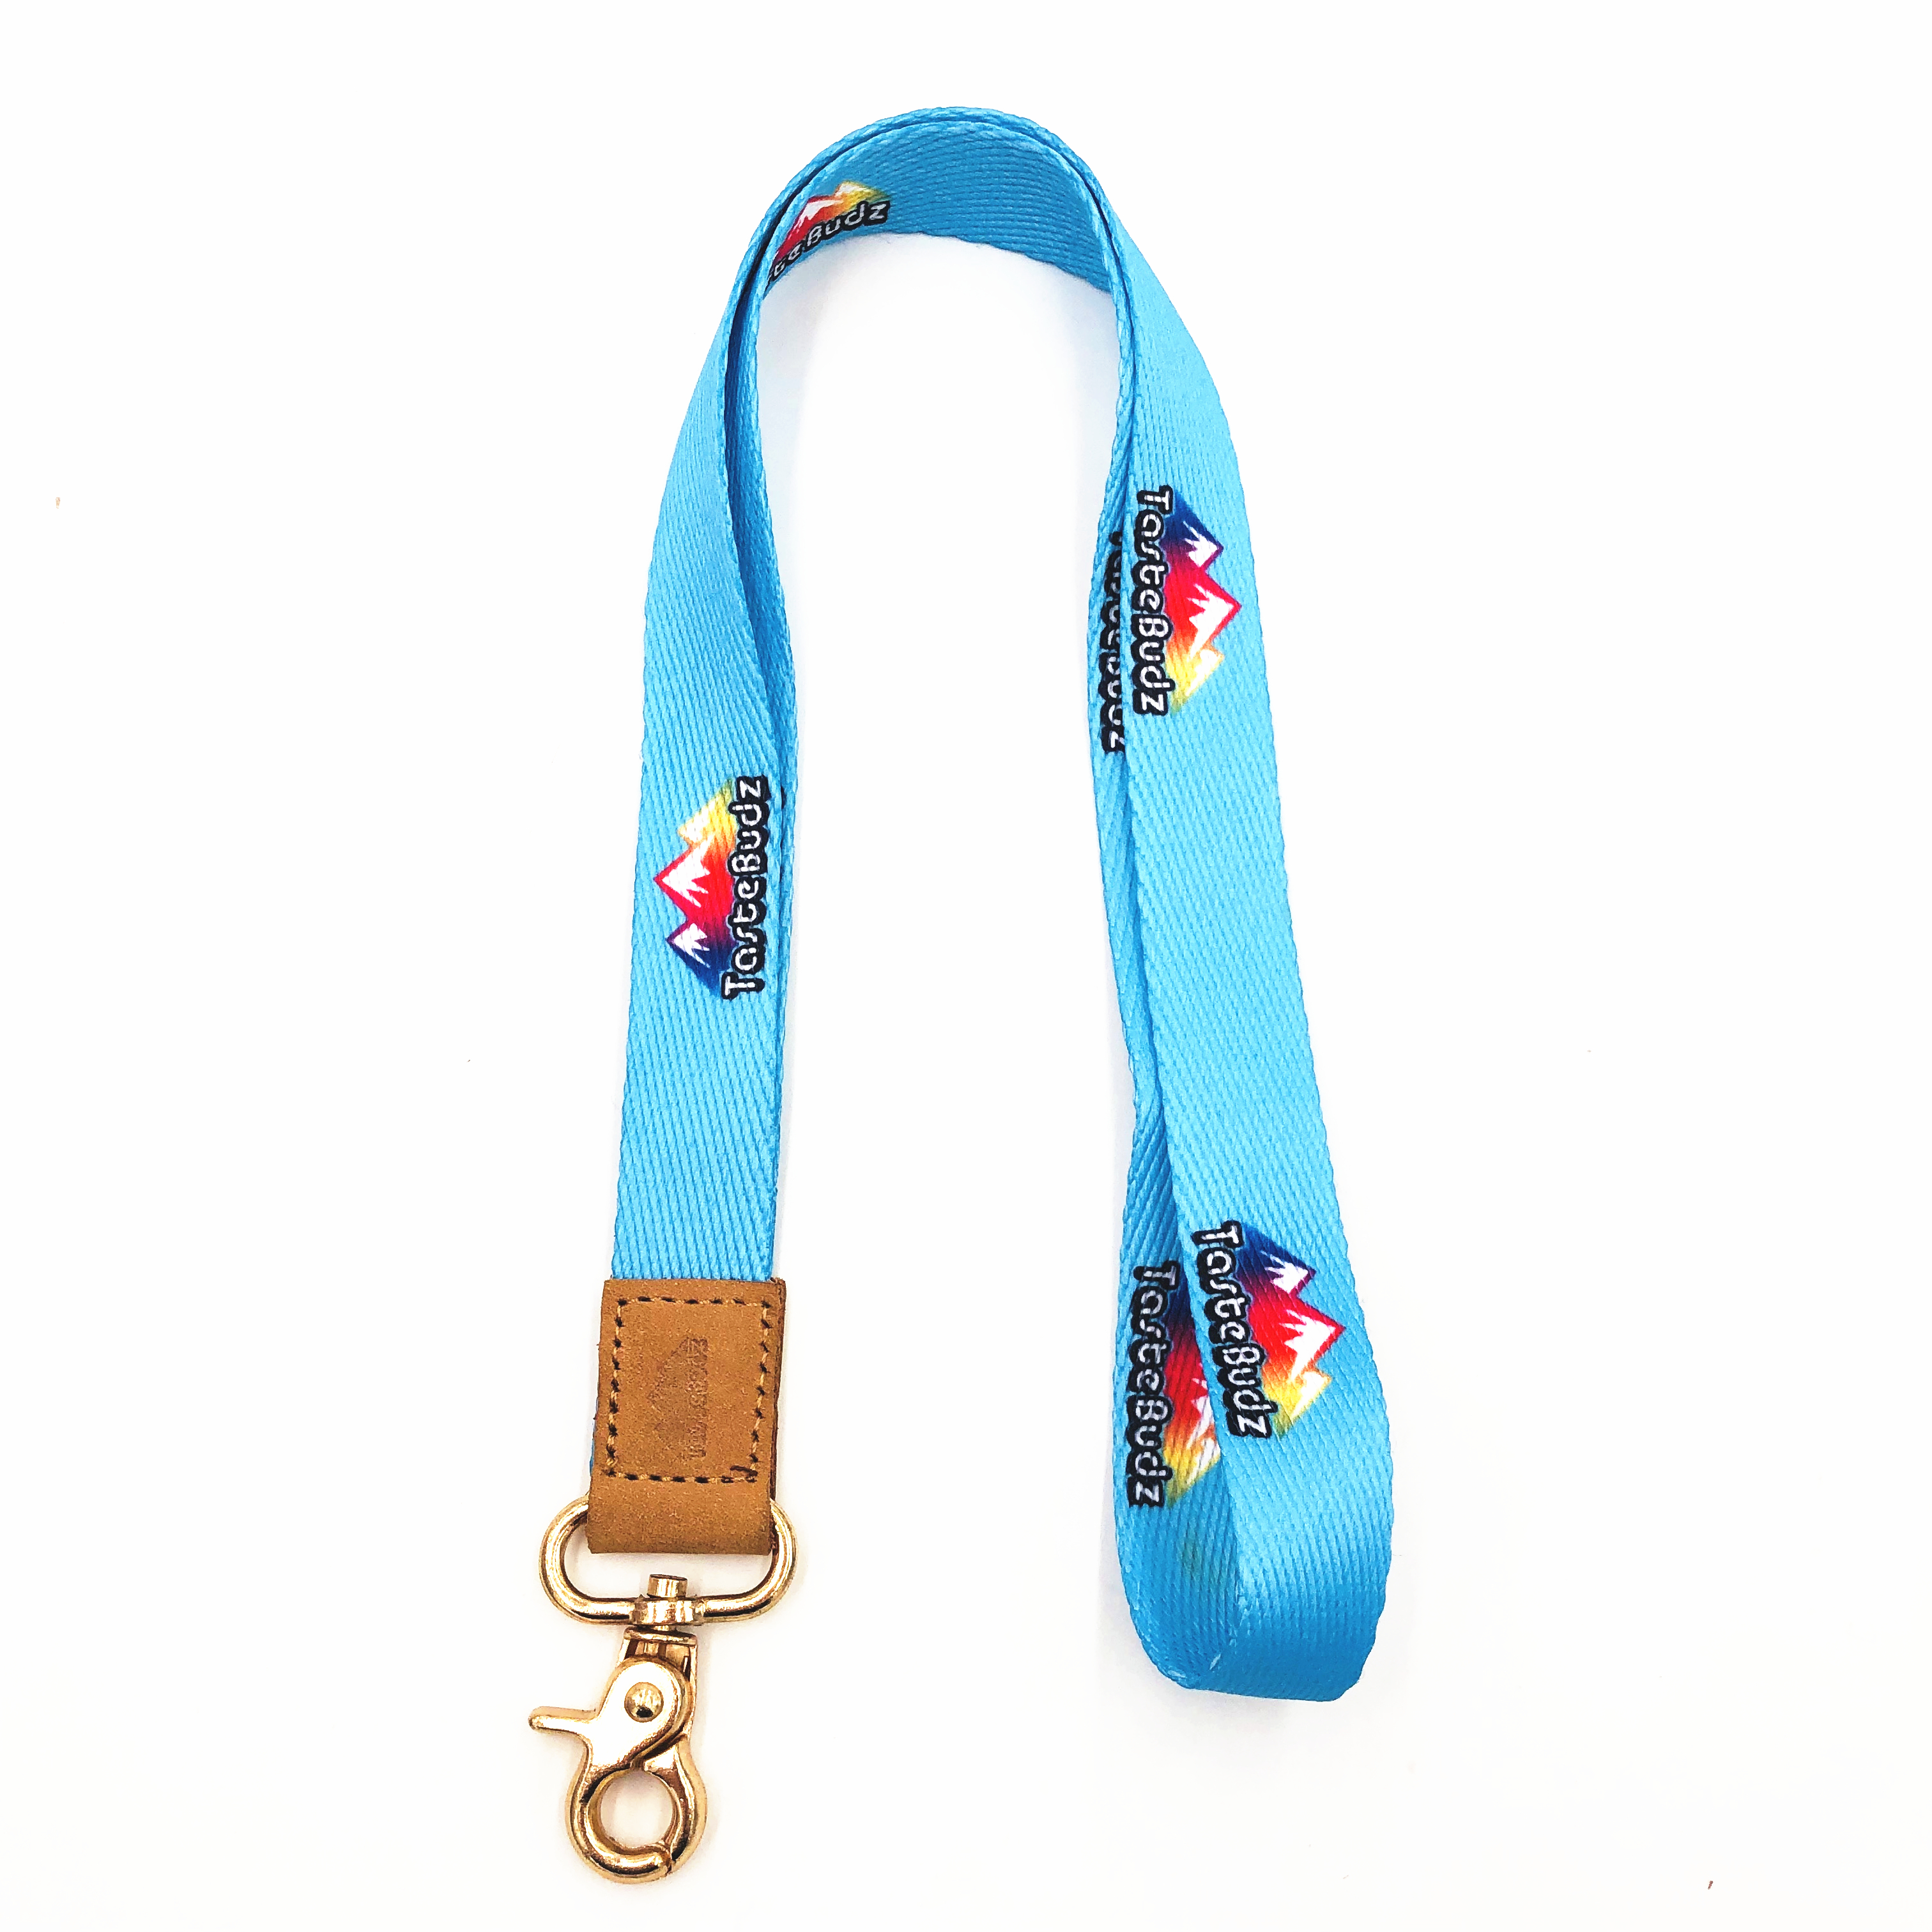 Fashion Custom Neck Lanyard Strap Premium Quality with Metal Clasp and Genuine Leather